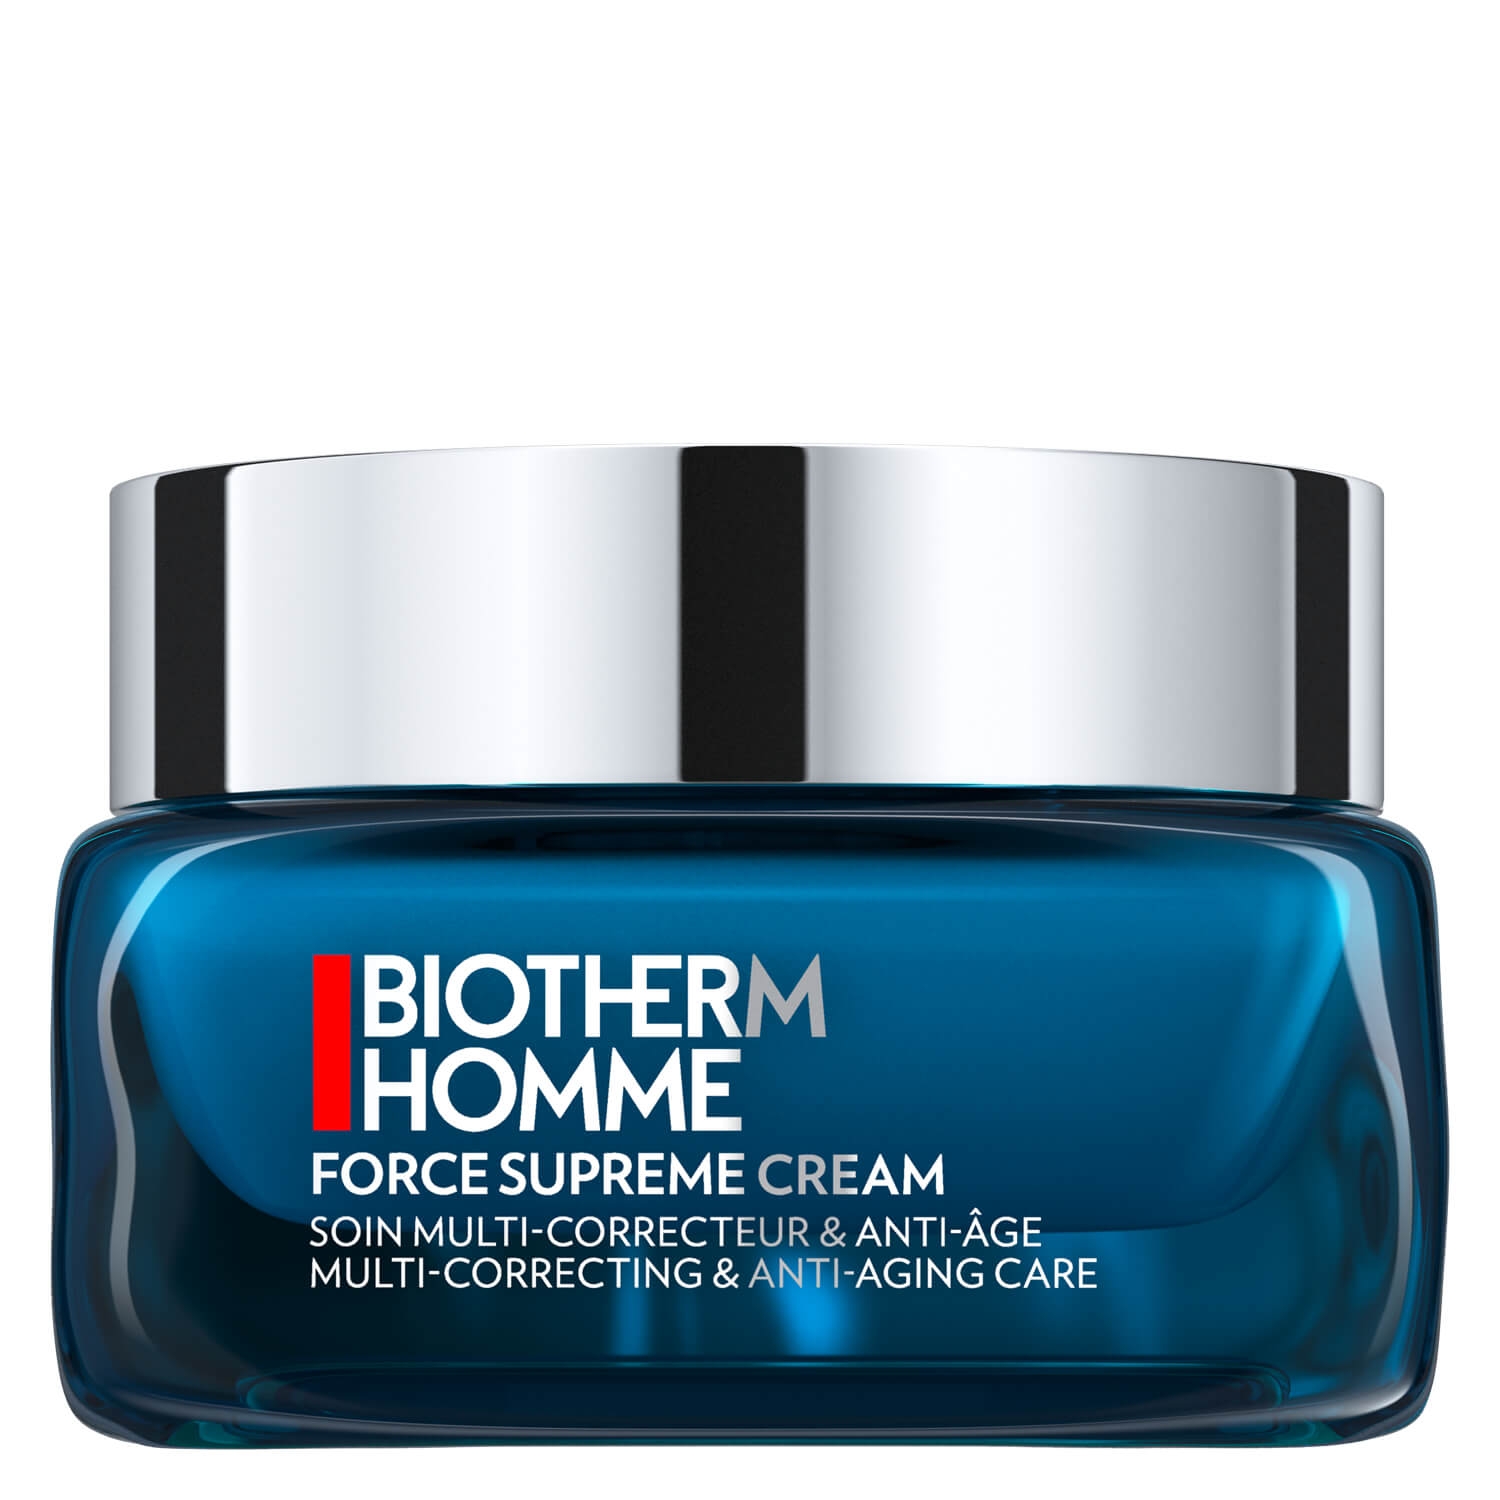 Product image from Biotherm Homme - Force Supreme Cream